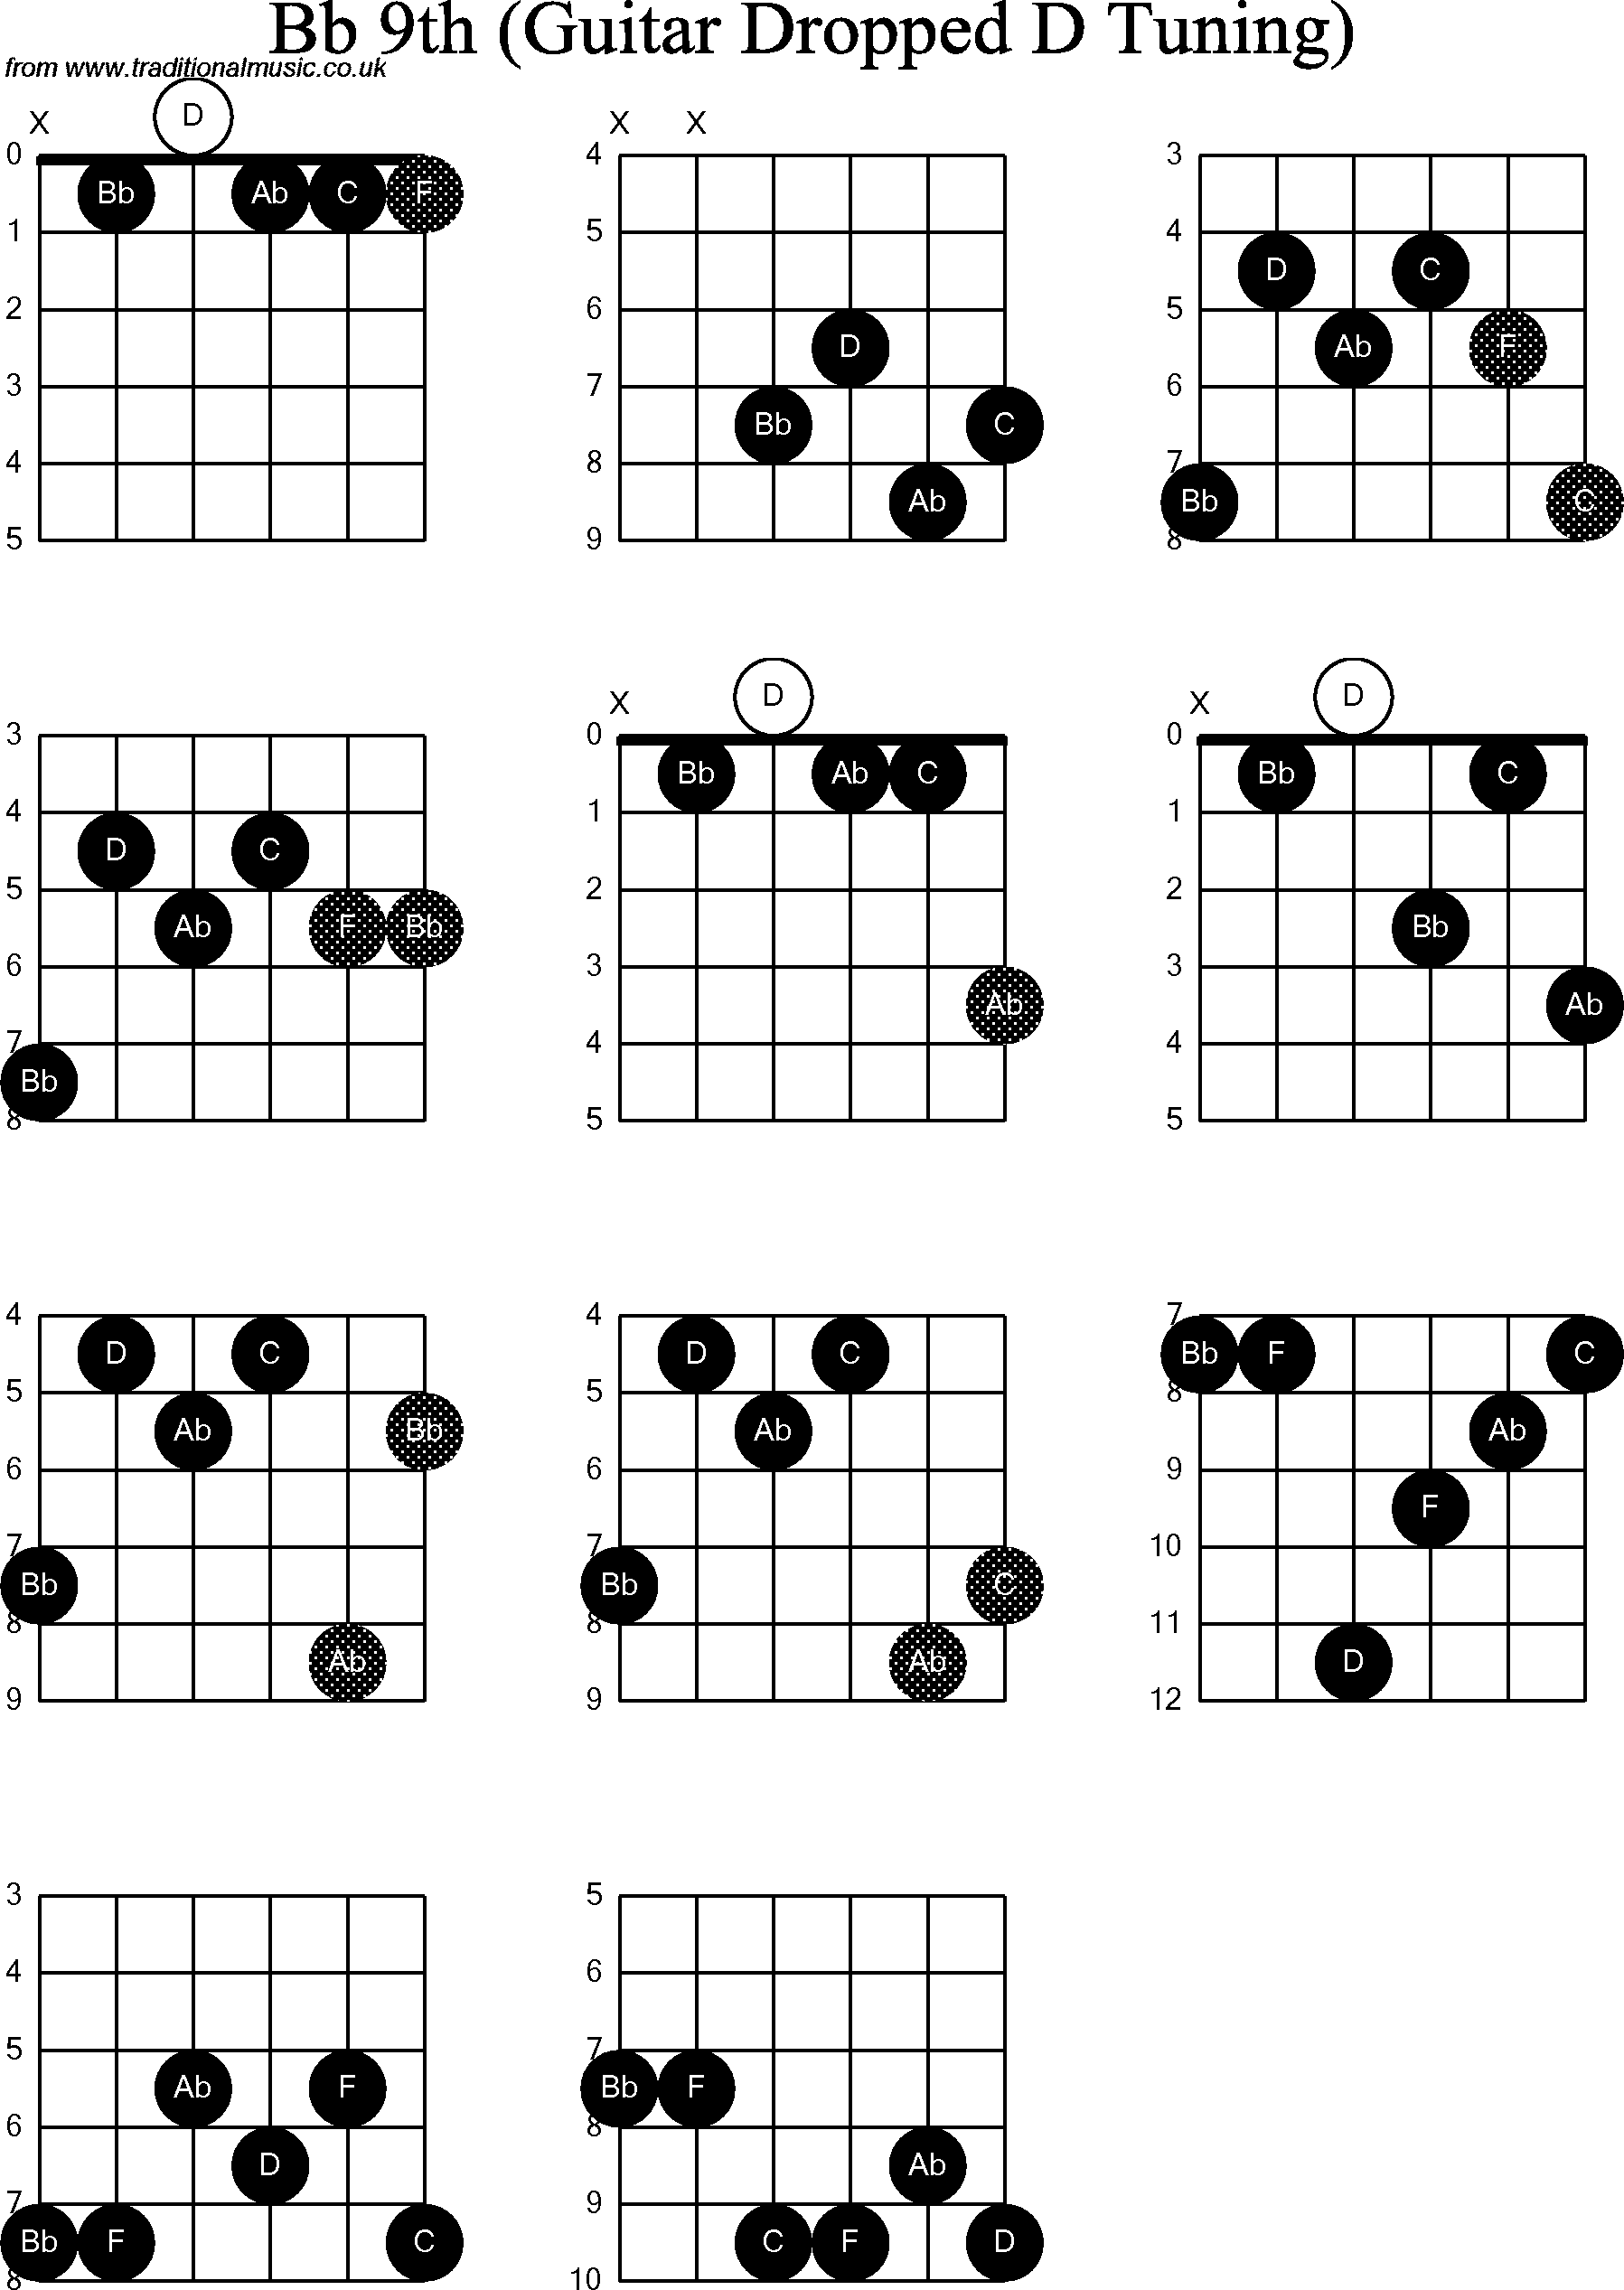 Chord diagrams for dropped D Guitar(DADGBE), Bb9th